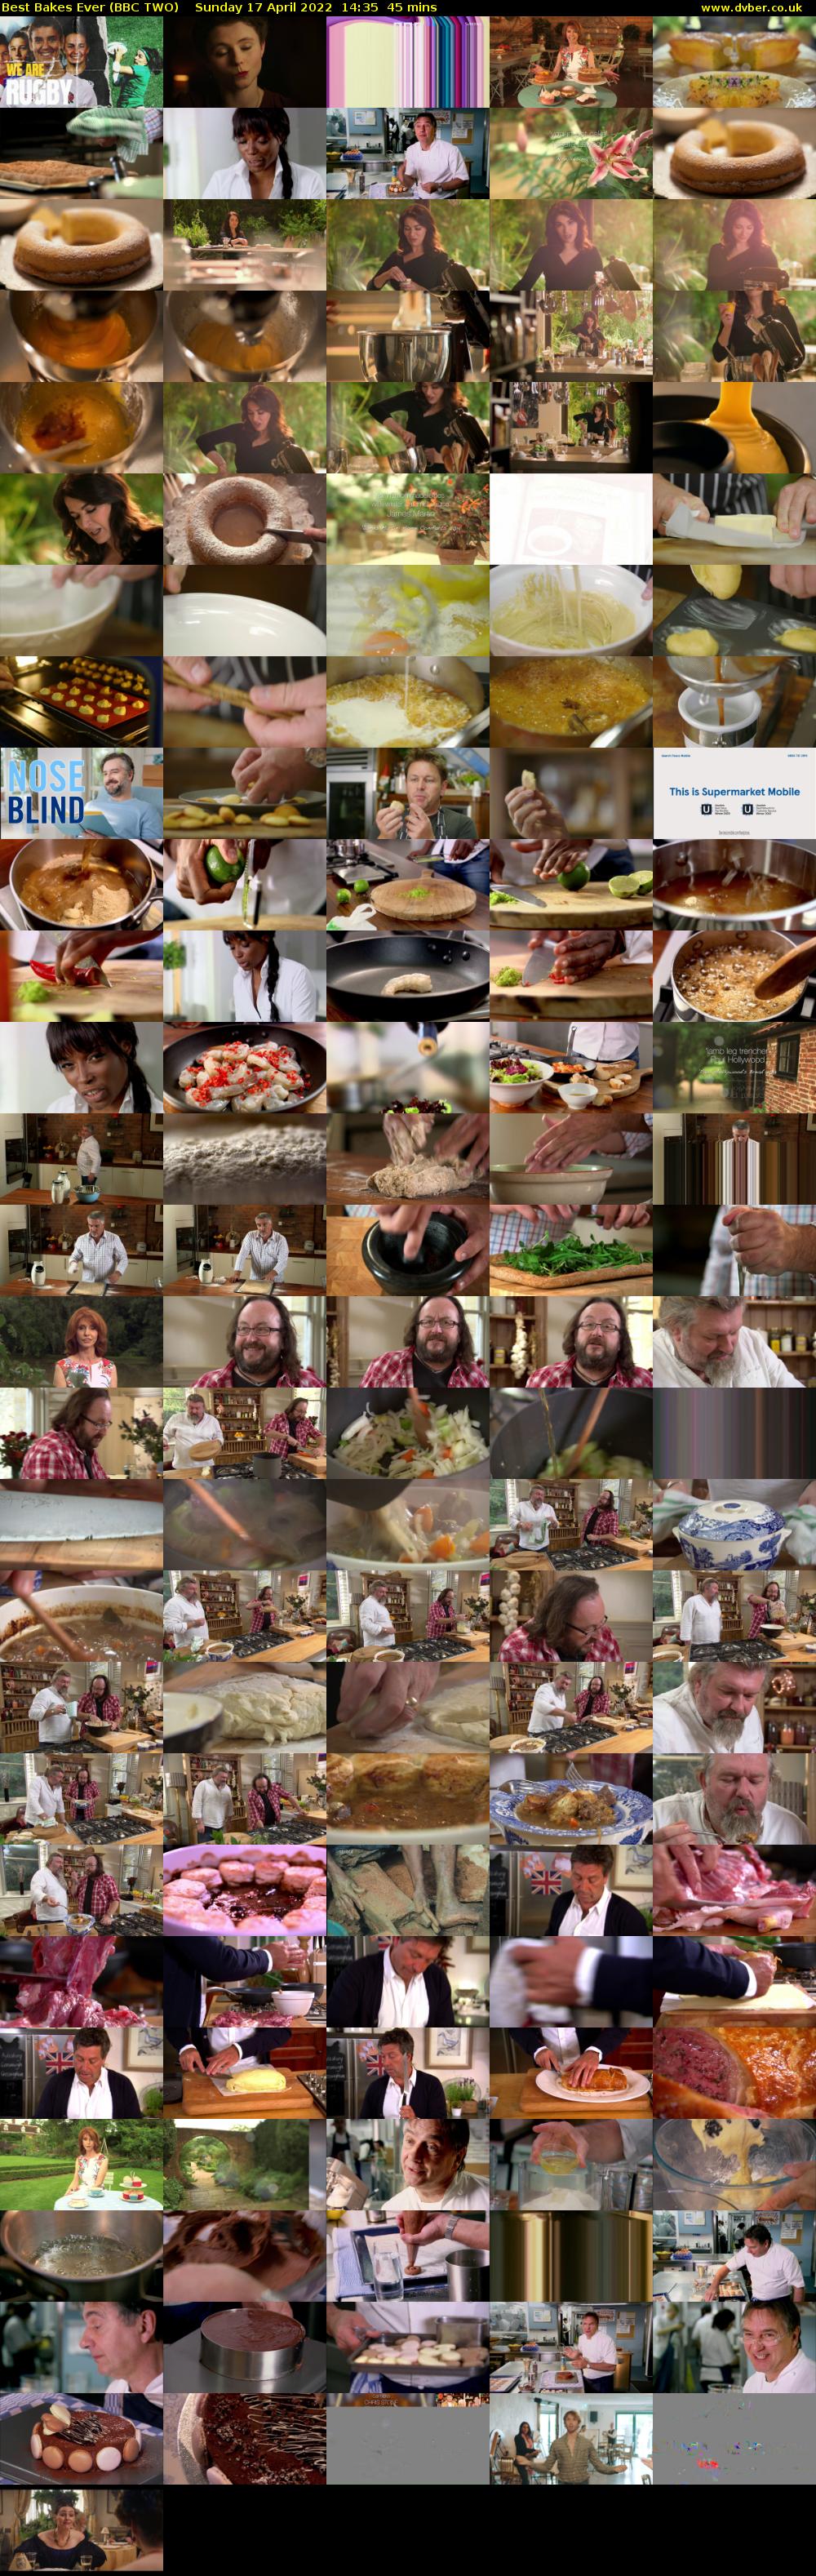 Best Bakes Ever (BBC TWO) Sunday 17 April 2022 14:35 - 15:20